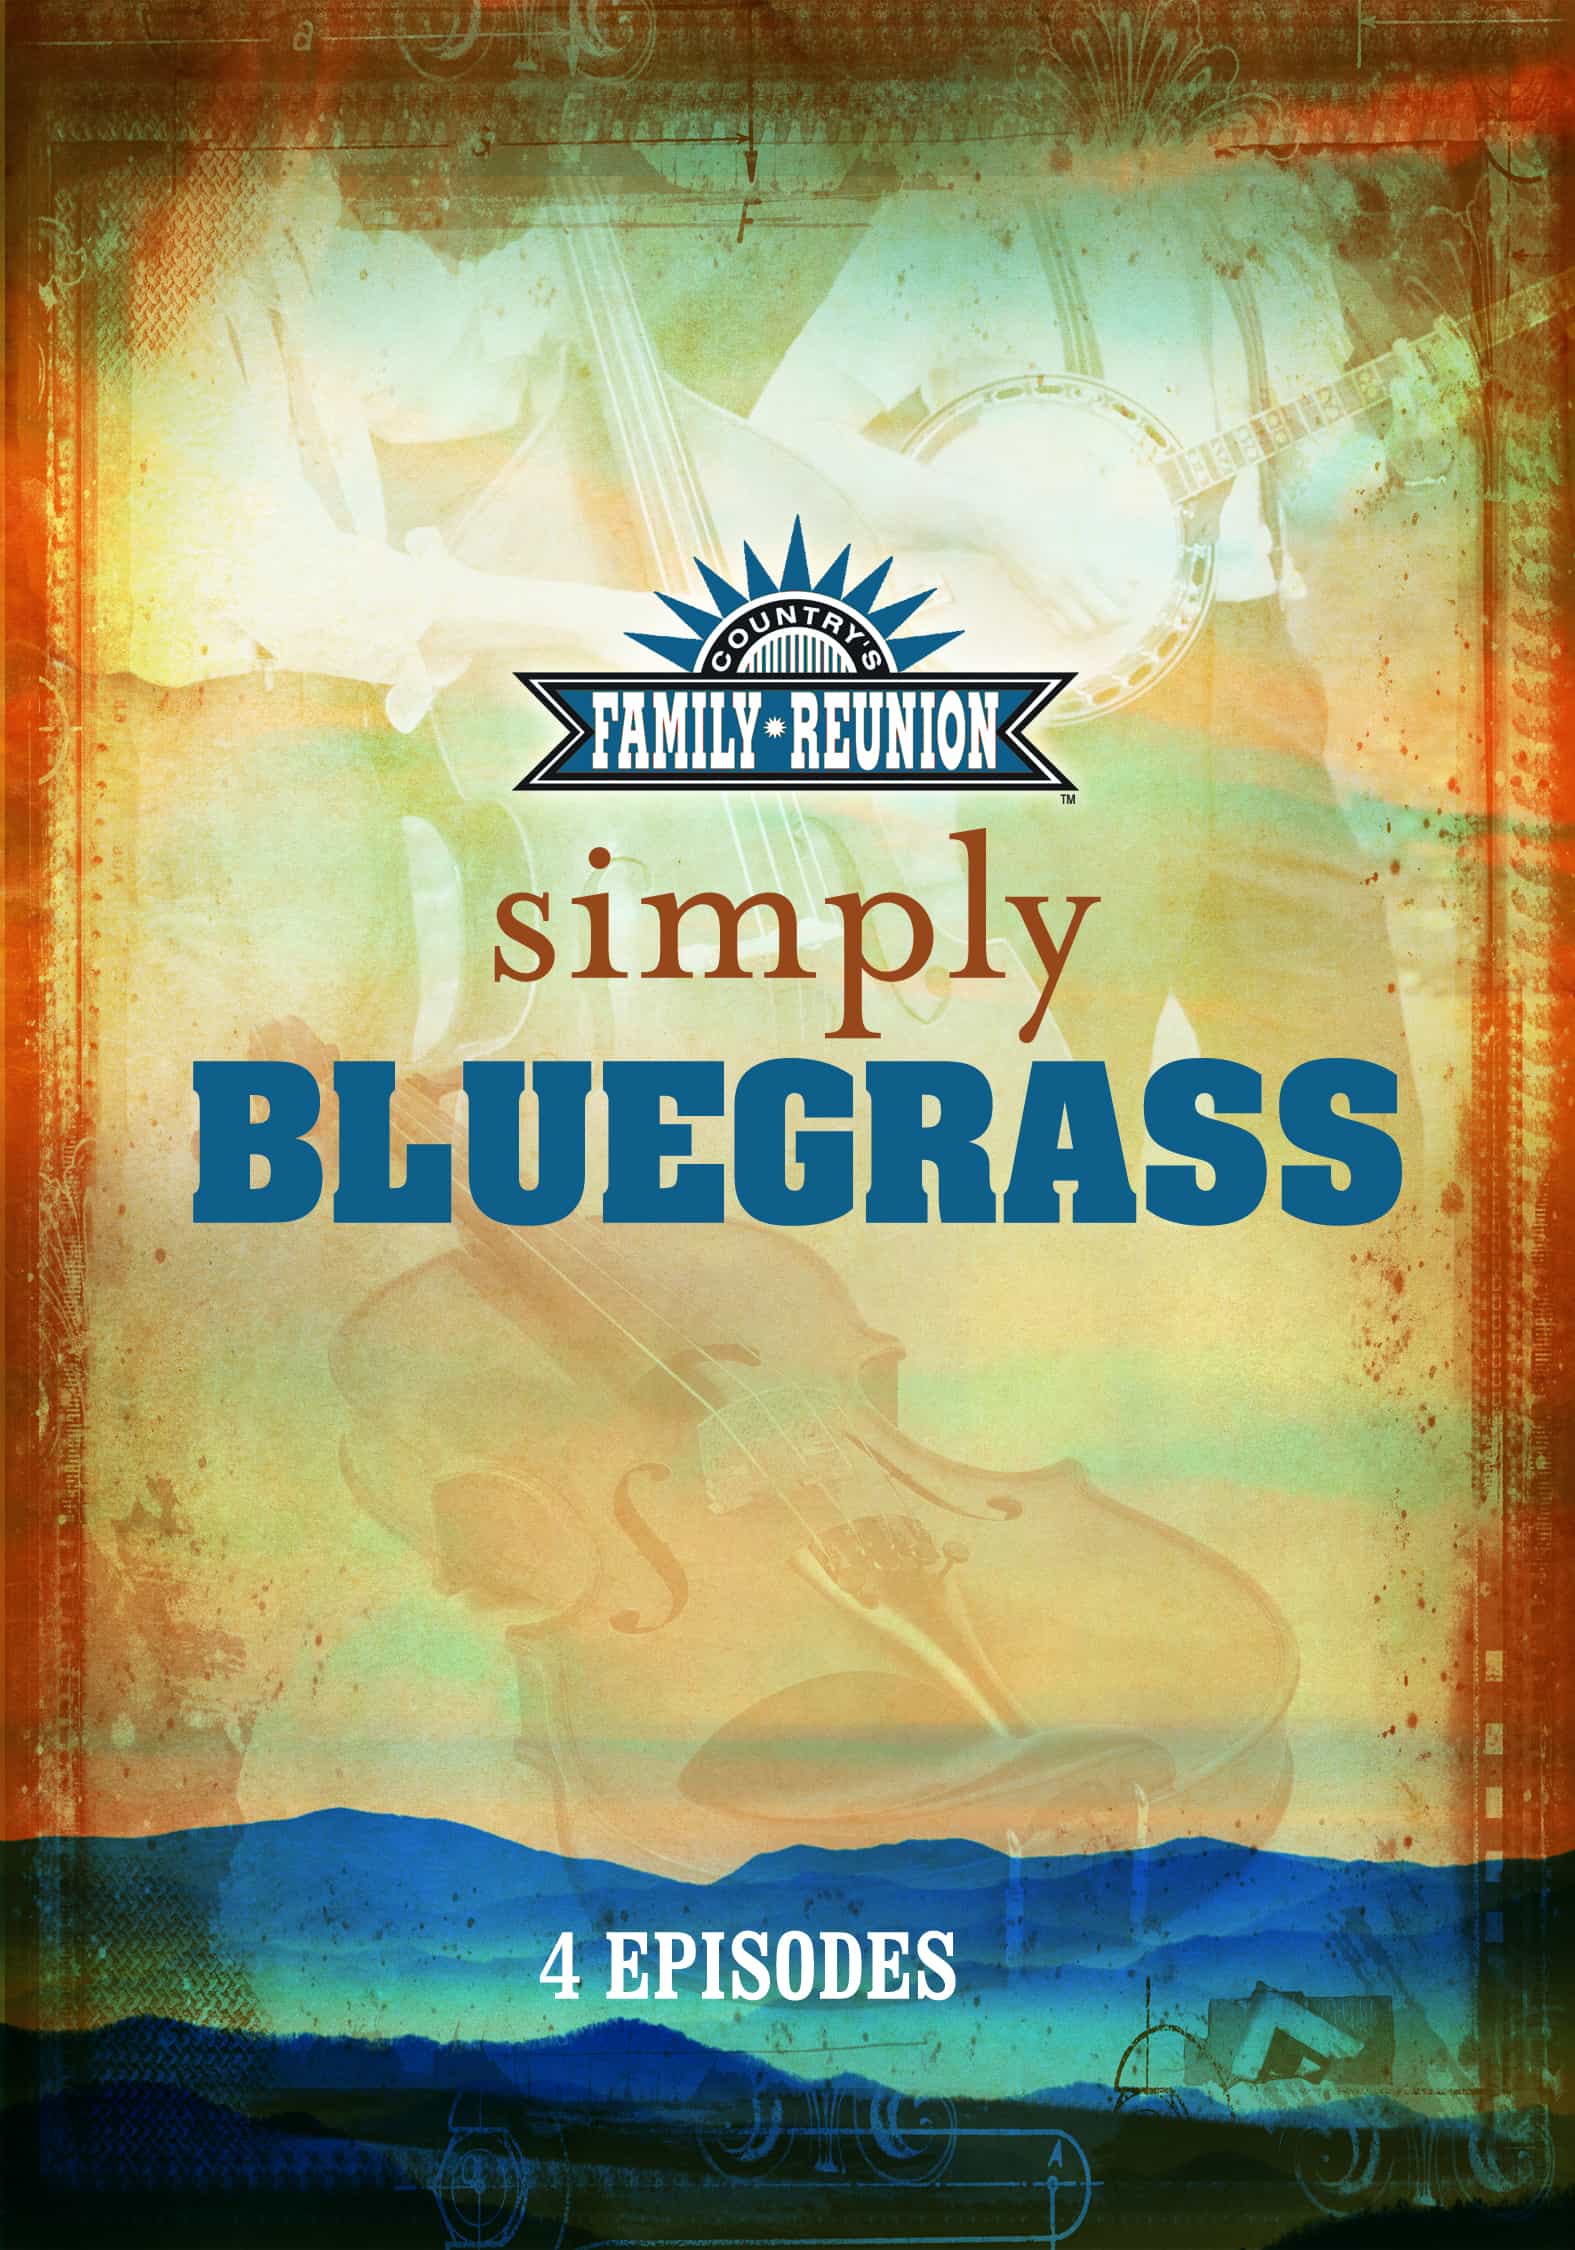 Country's Family Reunion Simply Bluegrass - Country Road TV